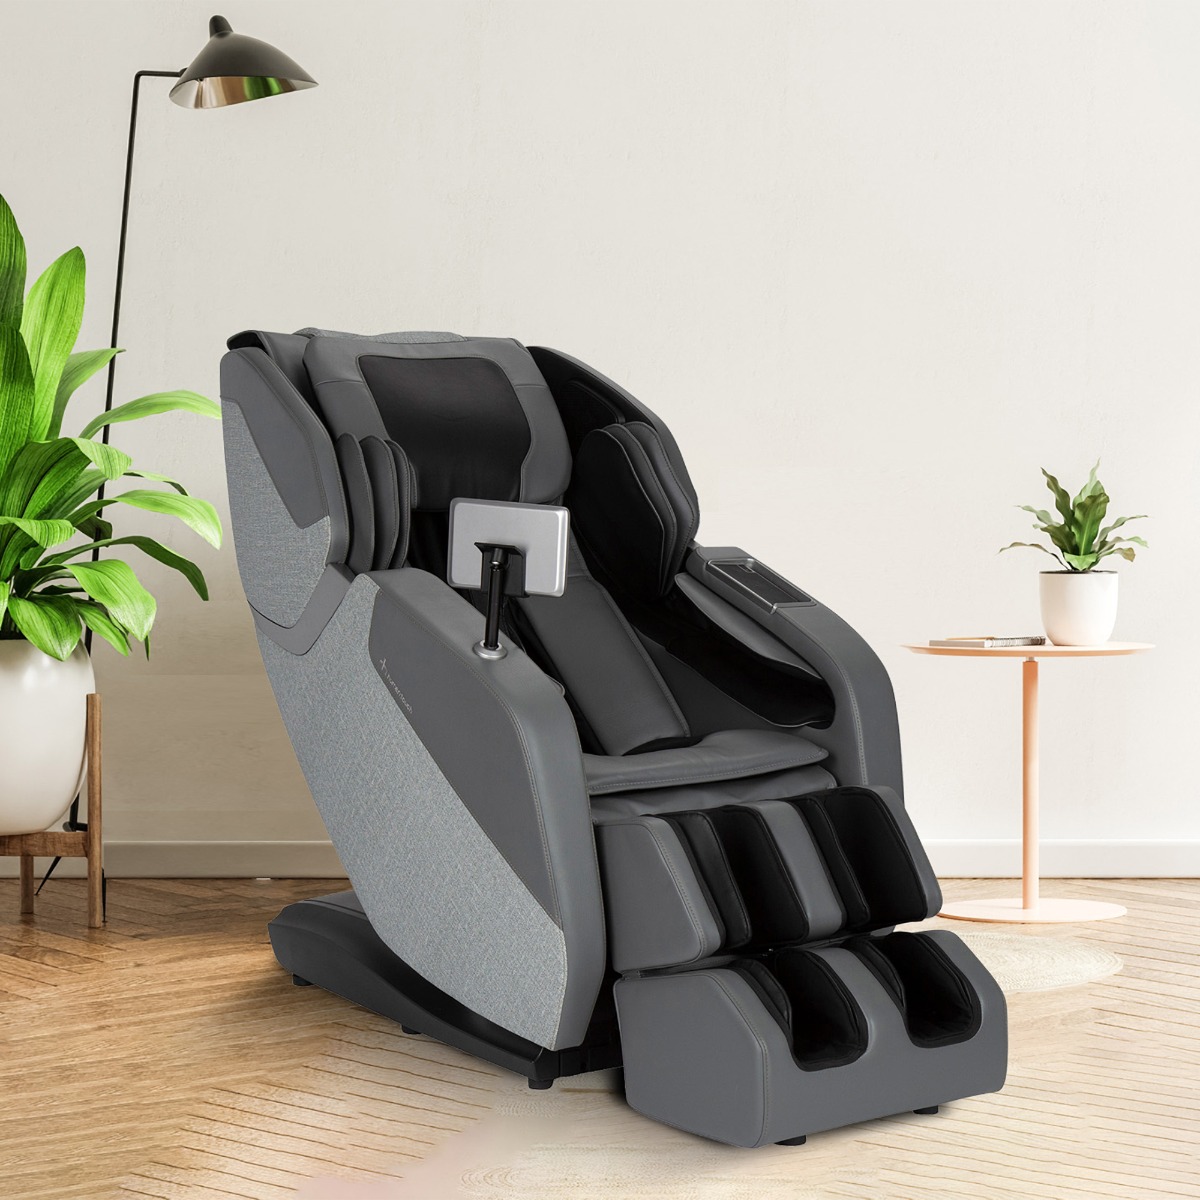 WholeBody ROVE Massage Chair in Gray